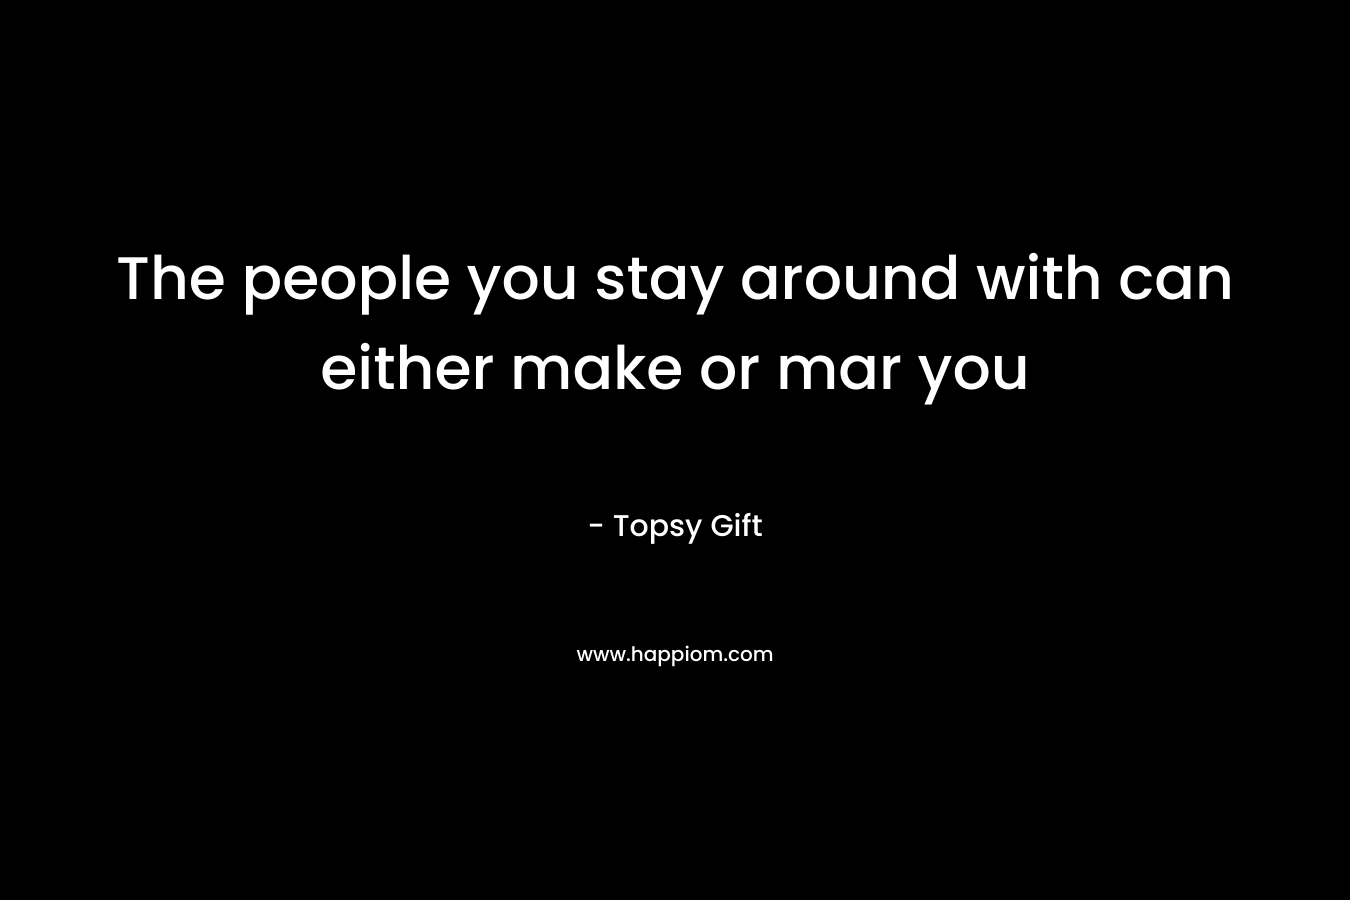 The people you stay around with can either make or mar you